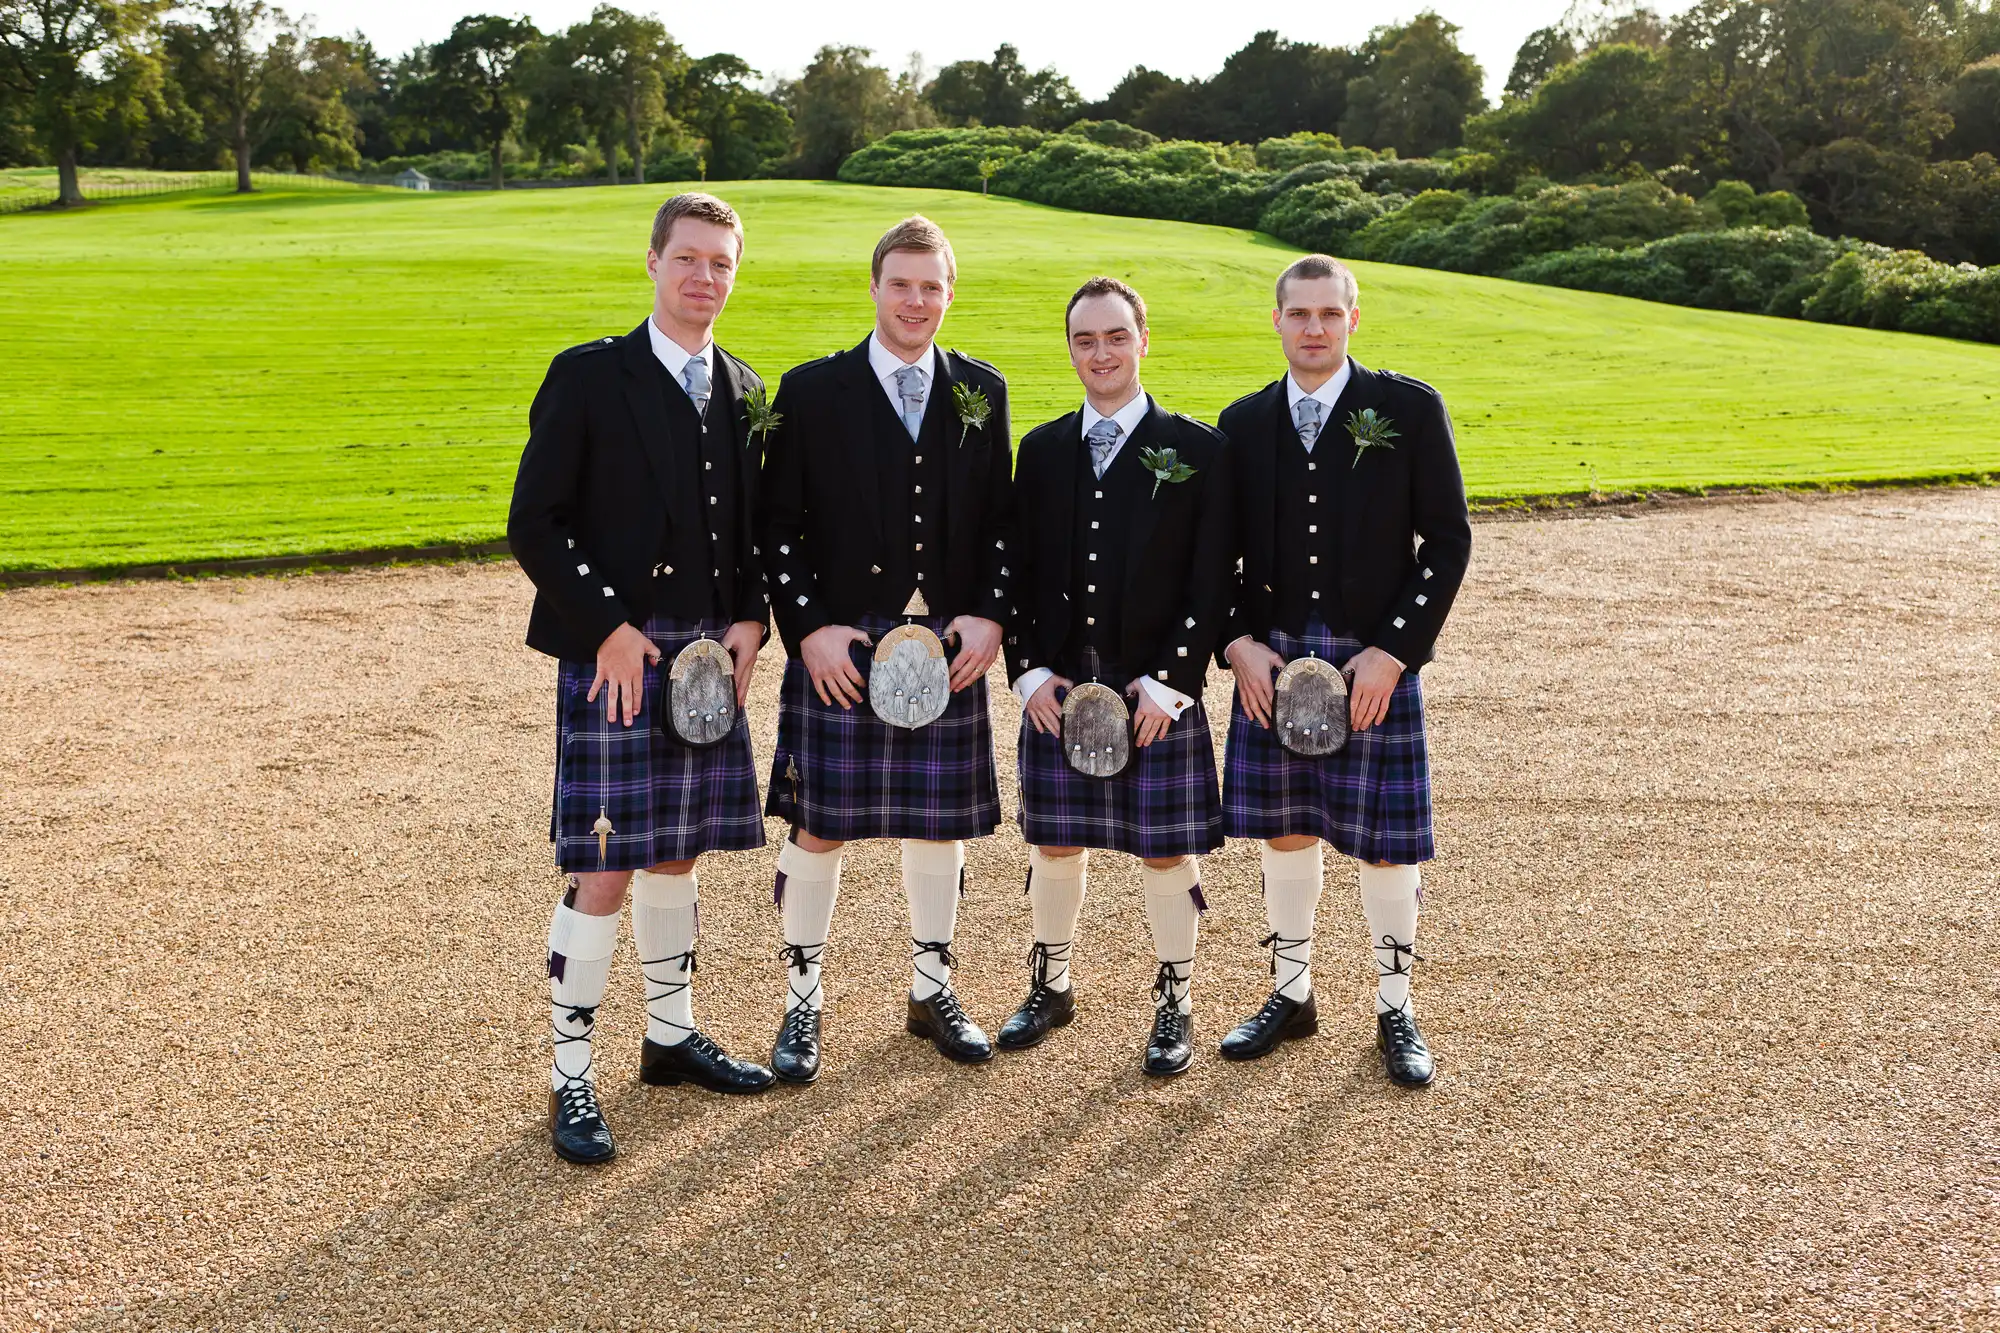 Four men in traditional scottish attire, including kilts and sporran, standing together on a grassy field with trees in the background.